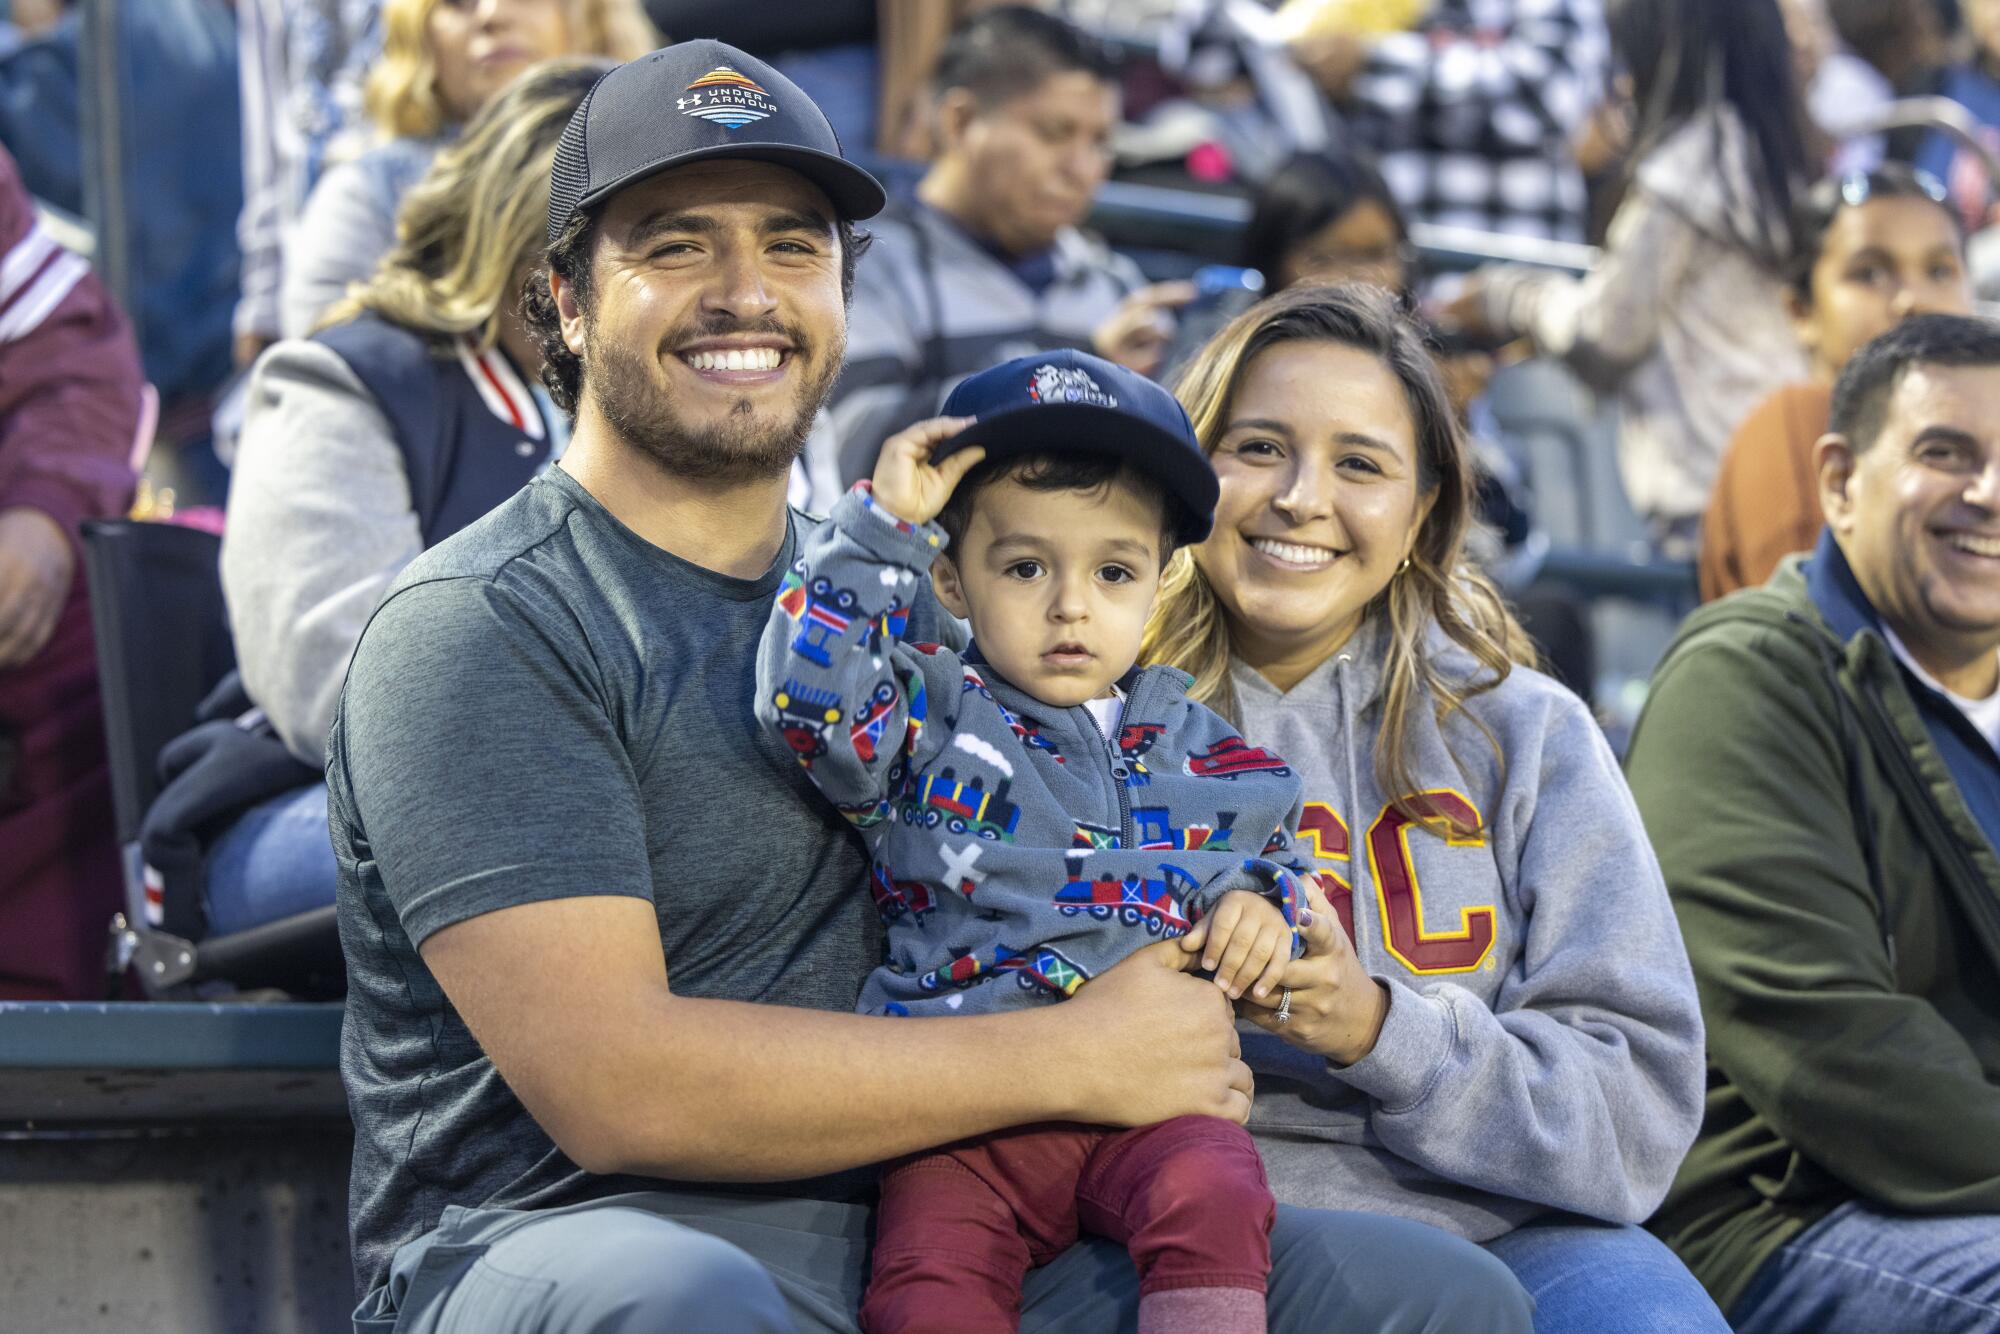 Andres Arellanes and his wife, Isabella, brought their young son to his first East L.A. Classic football game.